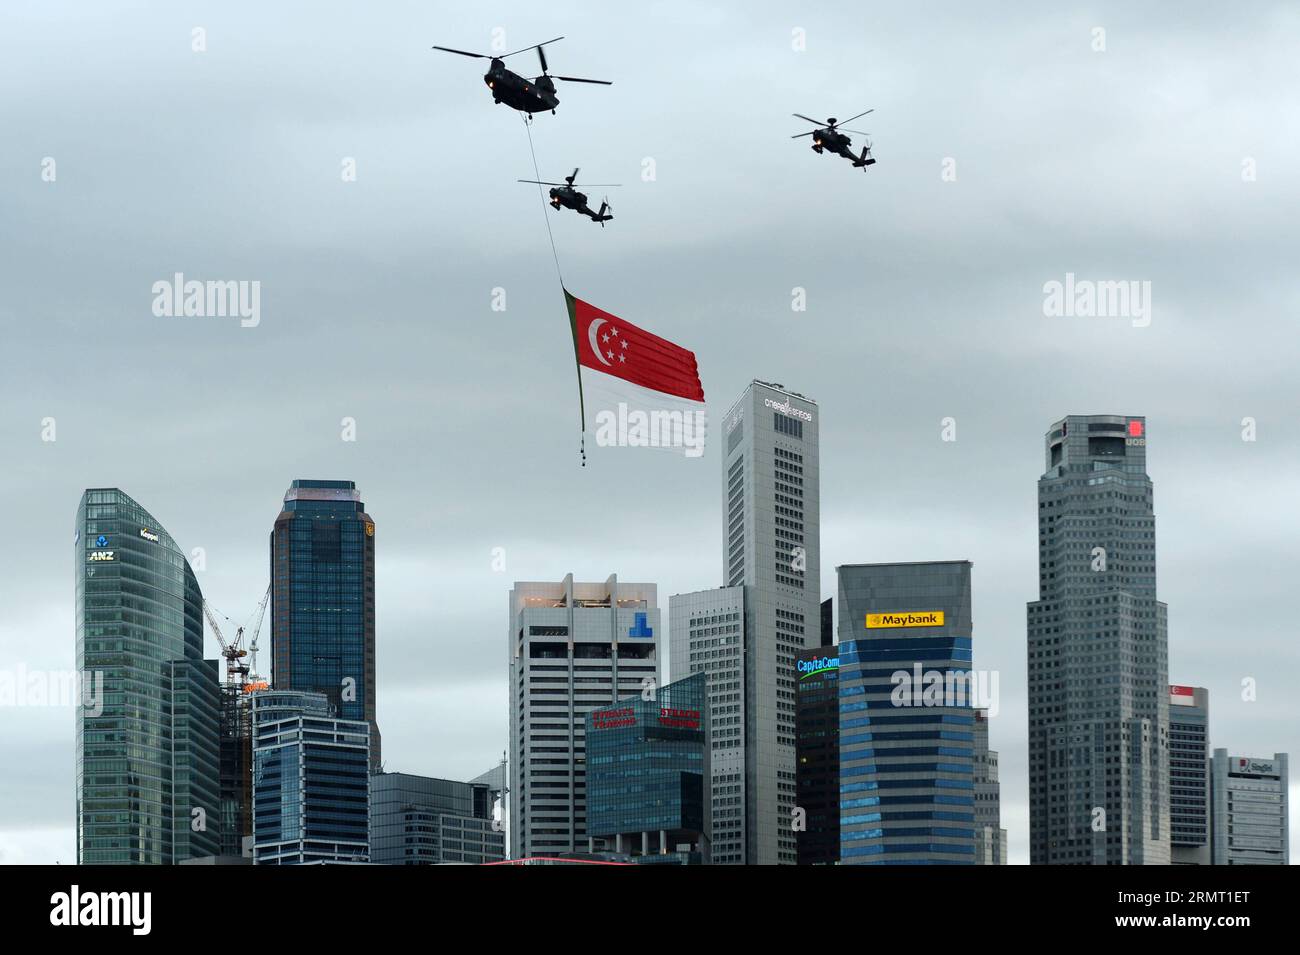 (140809) -- SINGAPORE, Aug. 9, 2014 -- Helicopters of the Republic of Singapore Air Force (RSAF) fly with the National flag during the National Day Parade in Singapore on Aug. 9, 2014. Singapore celebrates the 49th anniversary of independence on Saturday. ) SINGAPORE-NATIONAL DAY PARADE-ANNIVERSARY ThenxChihxWey PUBLICATIONxNOTxINxCHN   Singapore Aug 9 2014 Helicopters of The Republic of Singapore Air Force  Fly With The National Flag during The National Day Parade in Singapore ON Aug 9 2014 Singapore celebrates The 49th Anniversary of Independence ON Saturday Singapore National Day Parade Ann Stock Photo